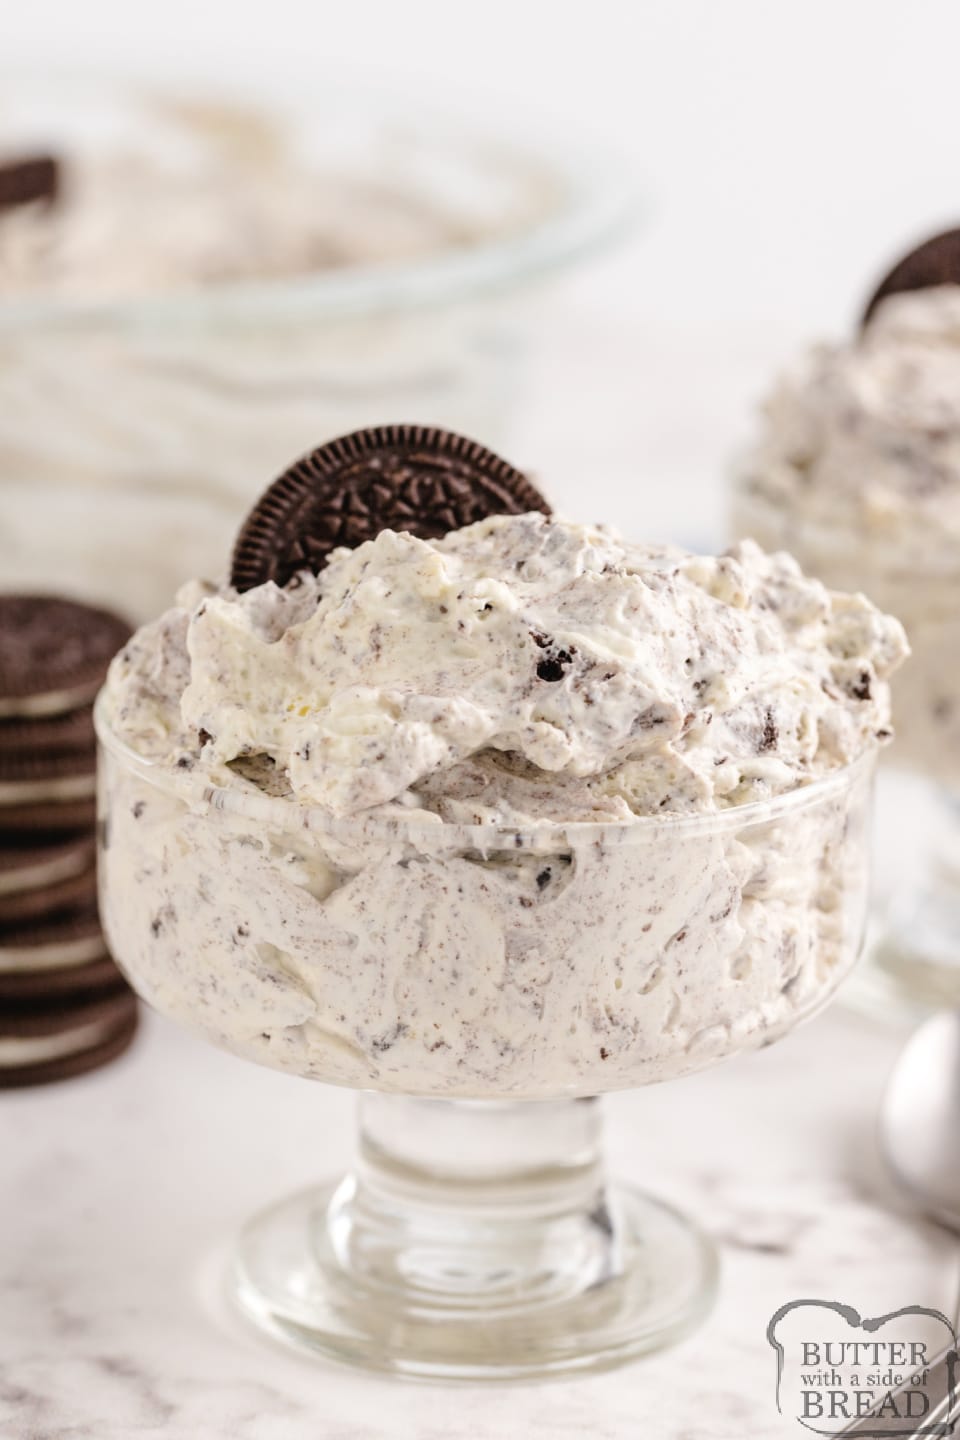 Cookies and Cream Salad made with Oreos and pudding for a delicious dessert or side dish that everyone loves! Only 4 ingredients and about 5 minutes to make. 